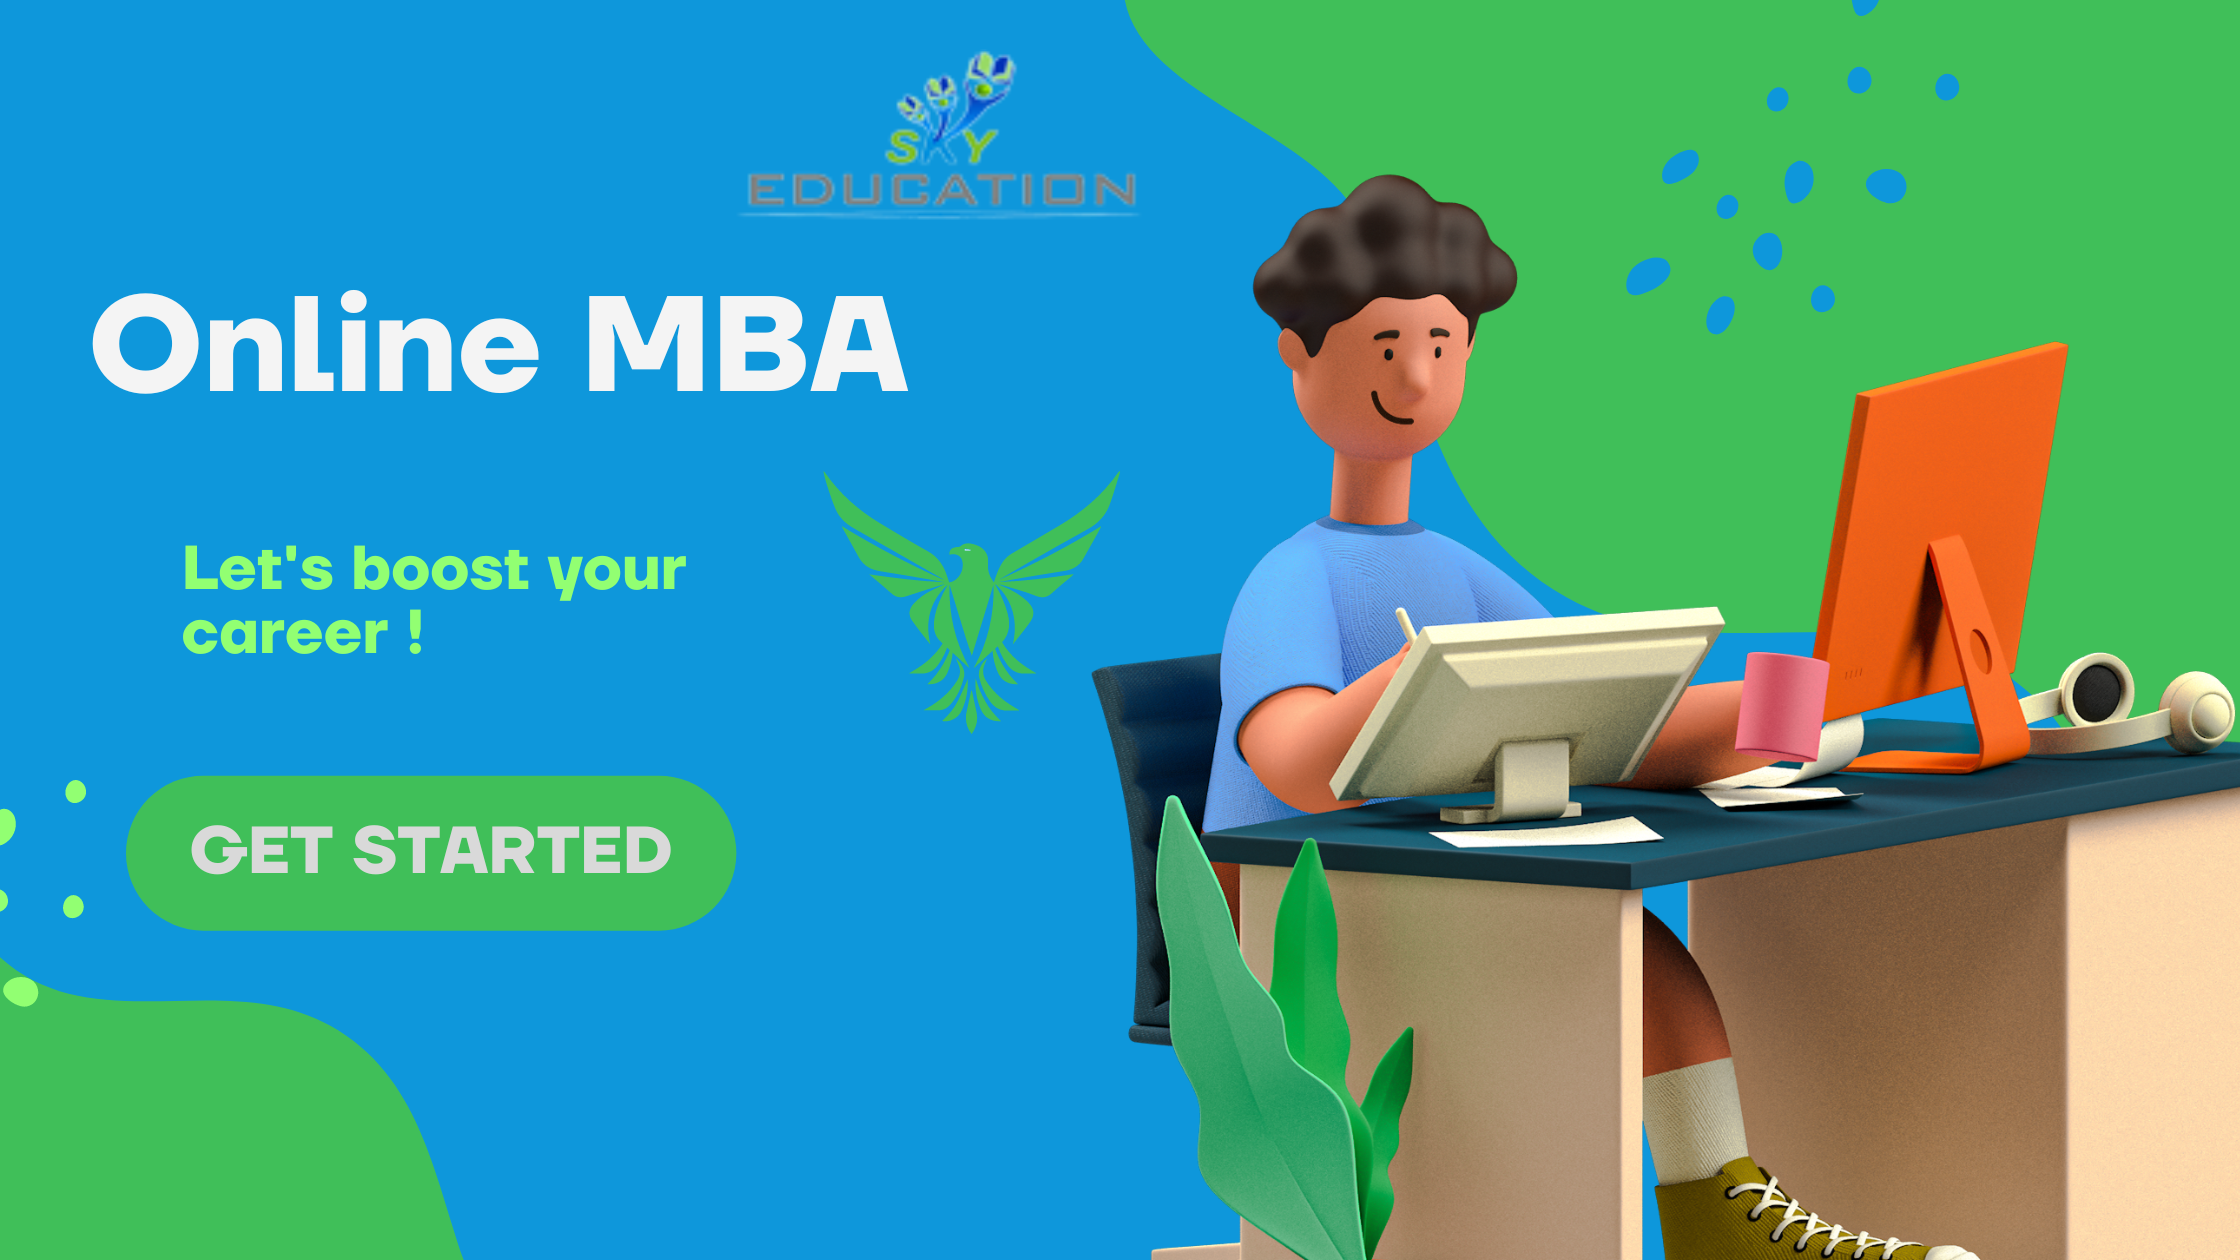 Online MBA: Fees, Syllabus, Course, and Admission Process